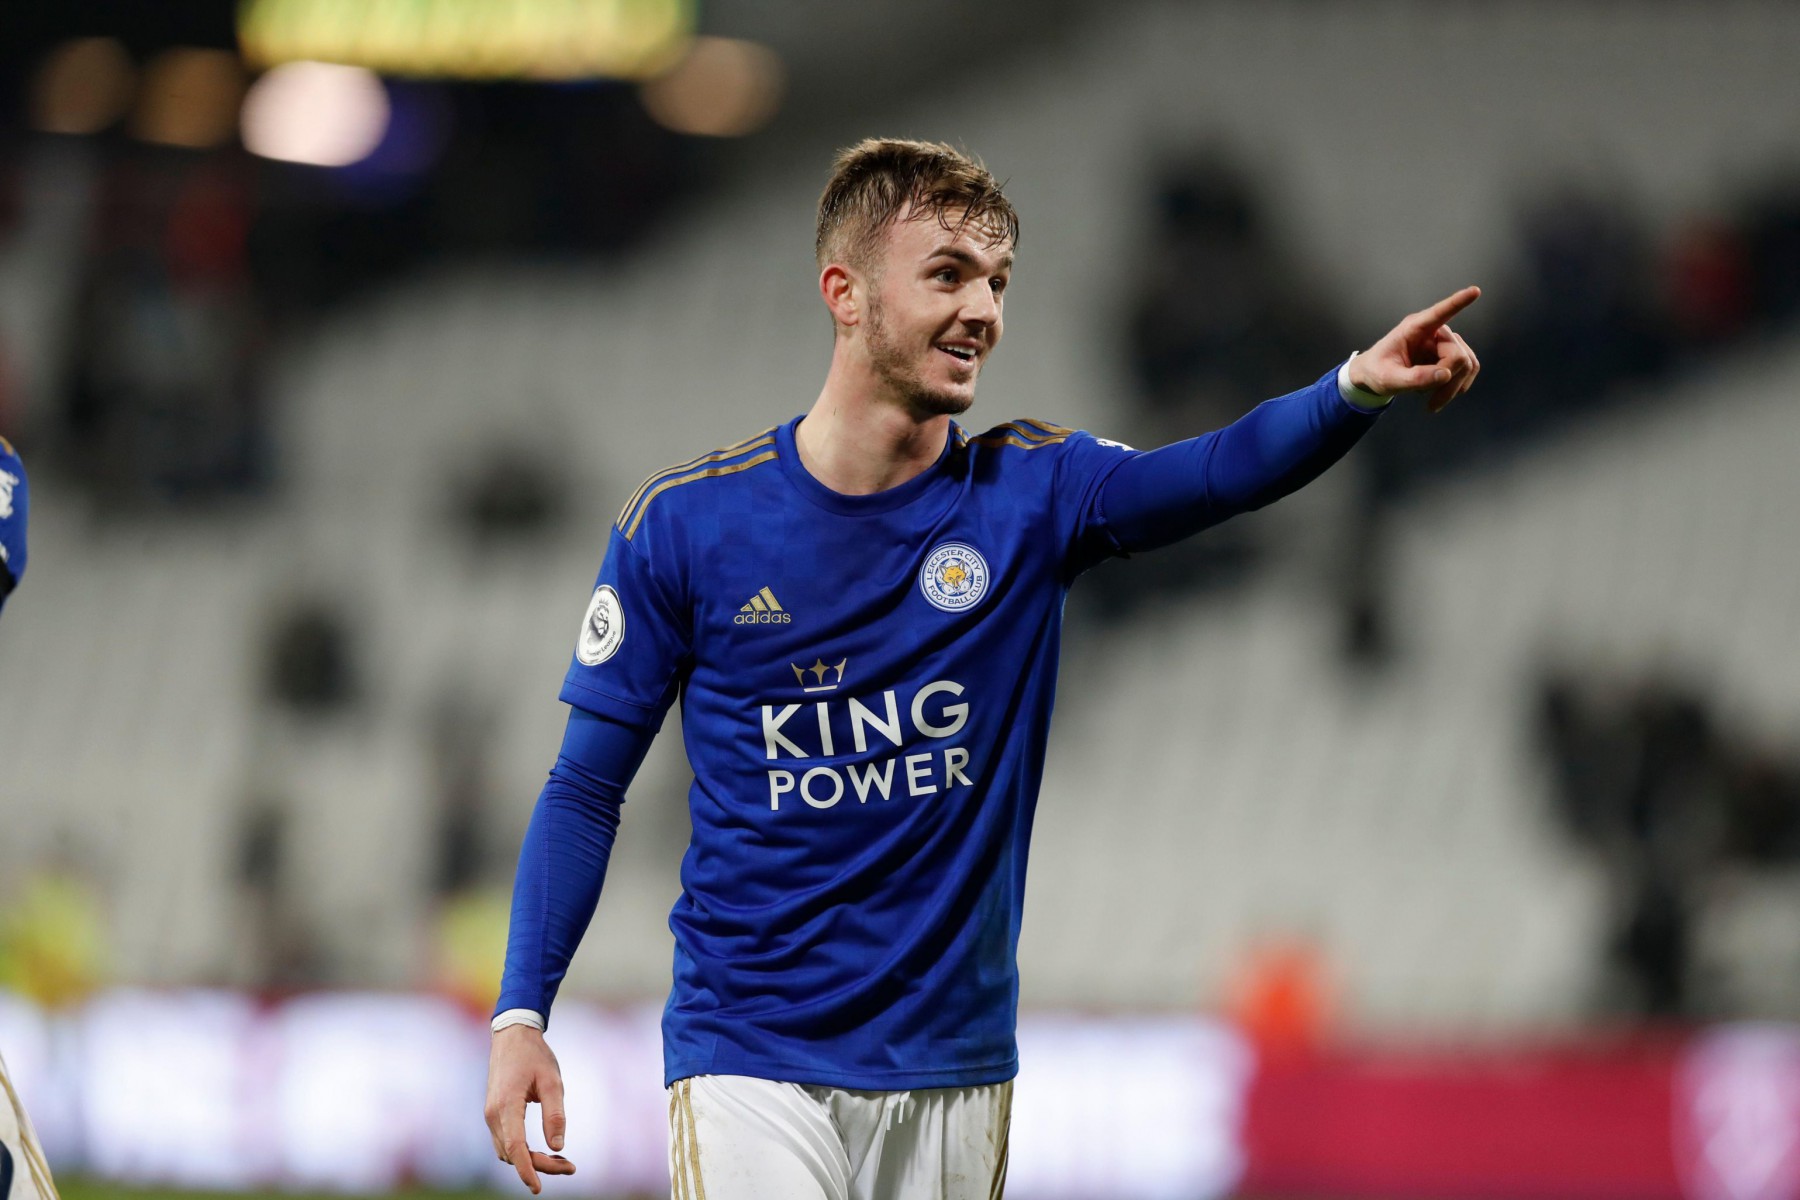 , Football betting tips TODAY: Maddison to net against Chelsea, Fernandes debut goal and Son to star in Man City goalfest